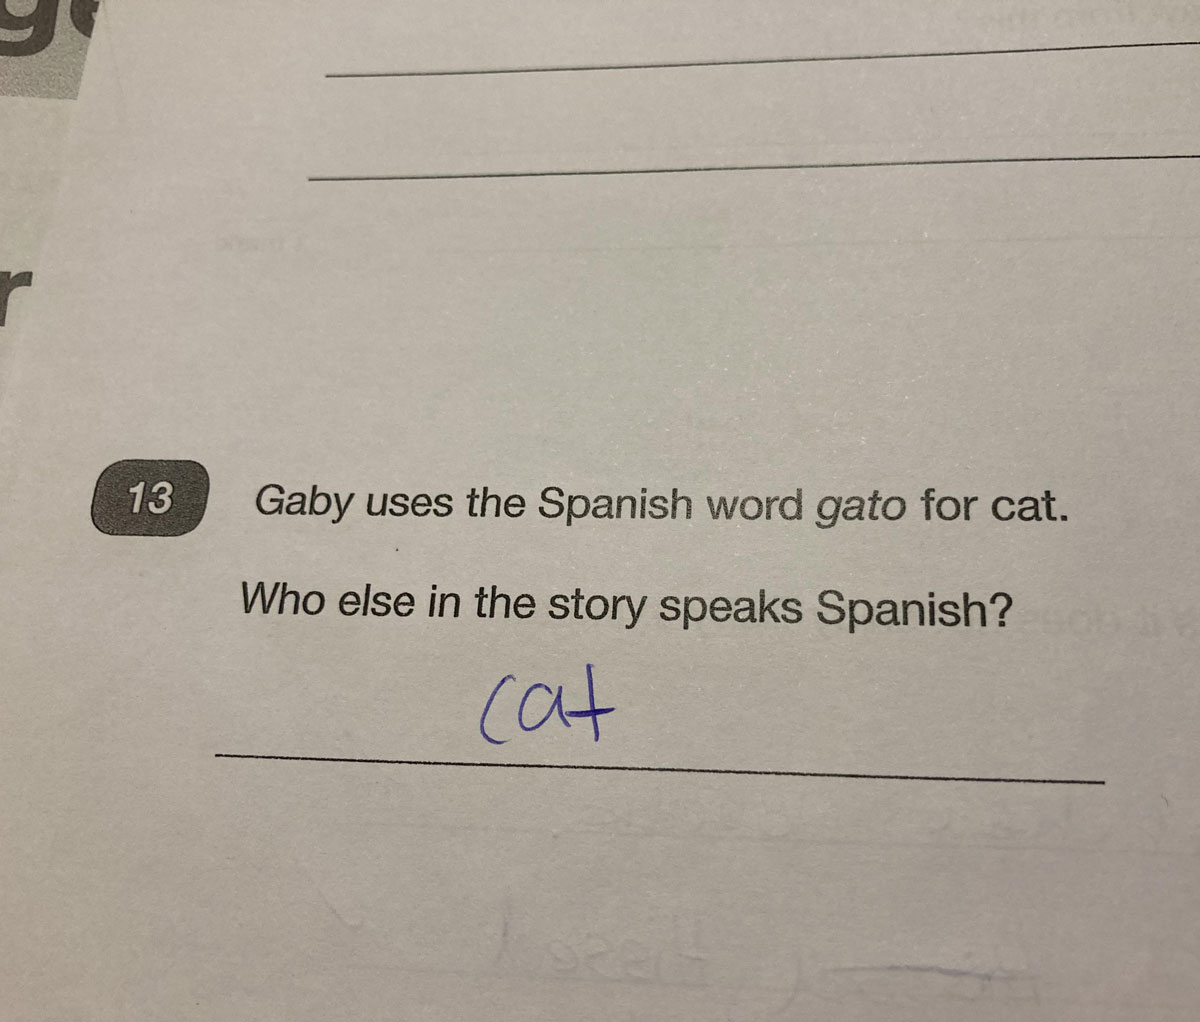 This answer from an 11-year-old